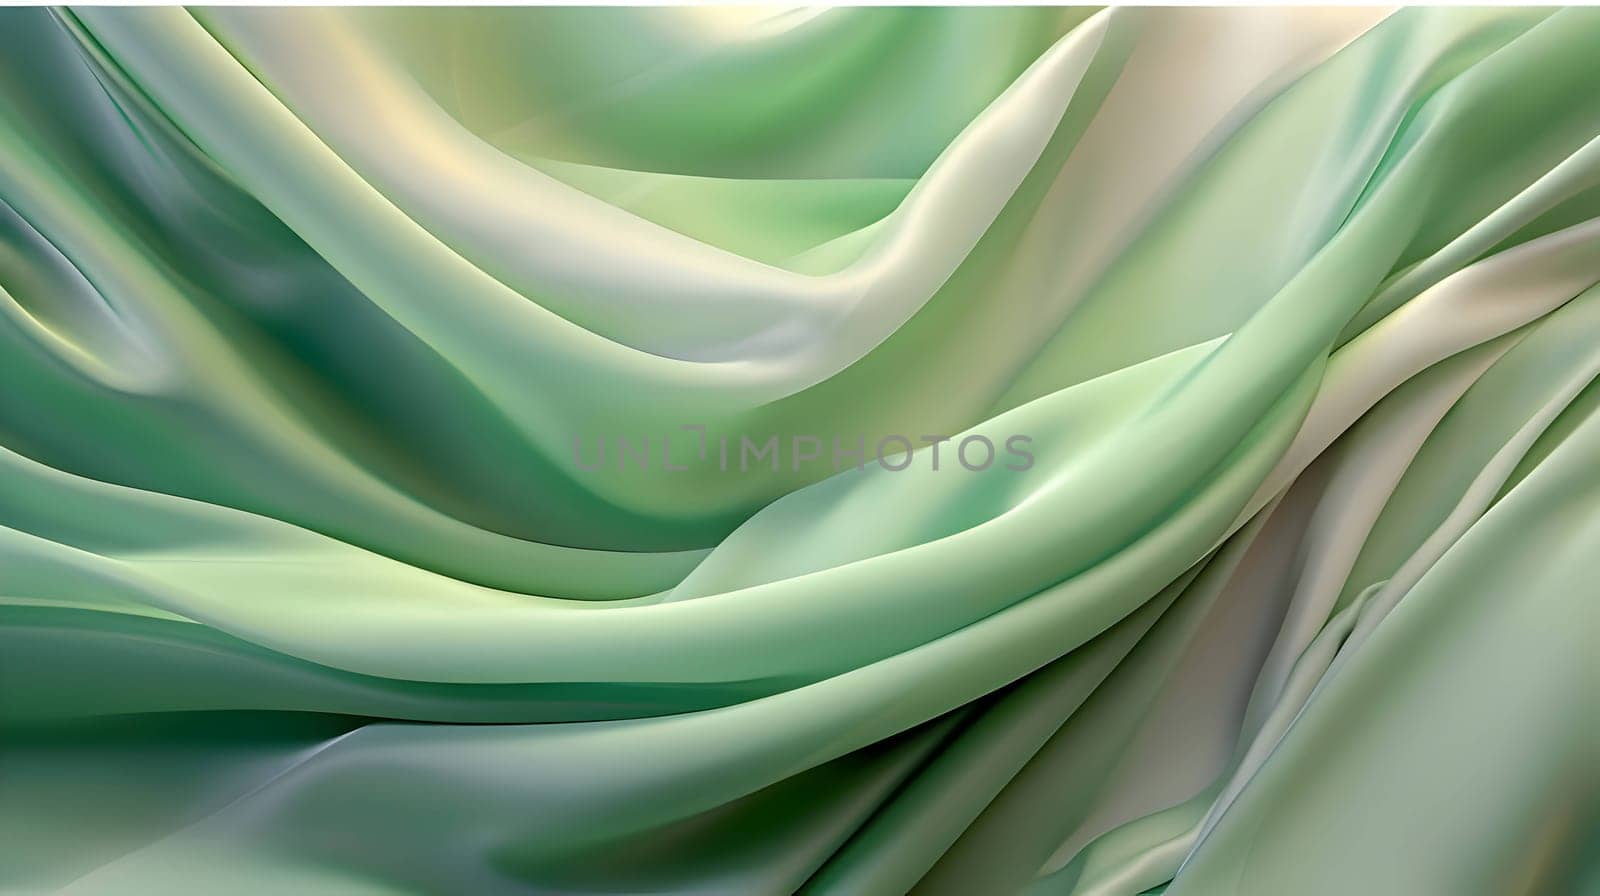 The abstract background wallpaper showcases the texture of sky green silk fabric, with elegant folds creating a visually pleasing and tactile impression.